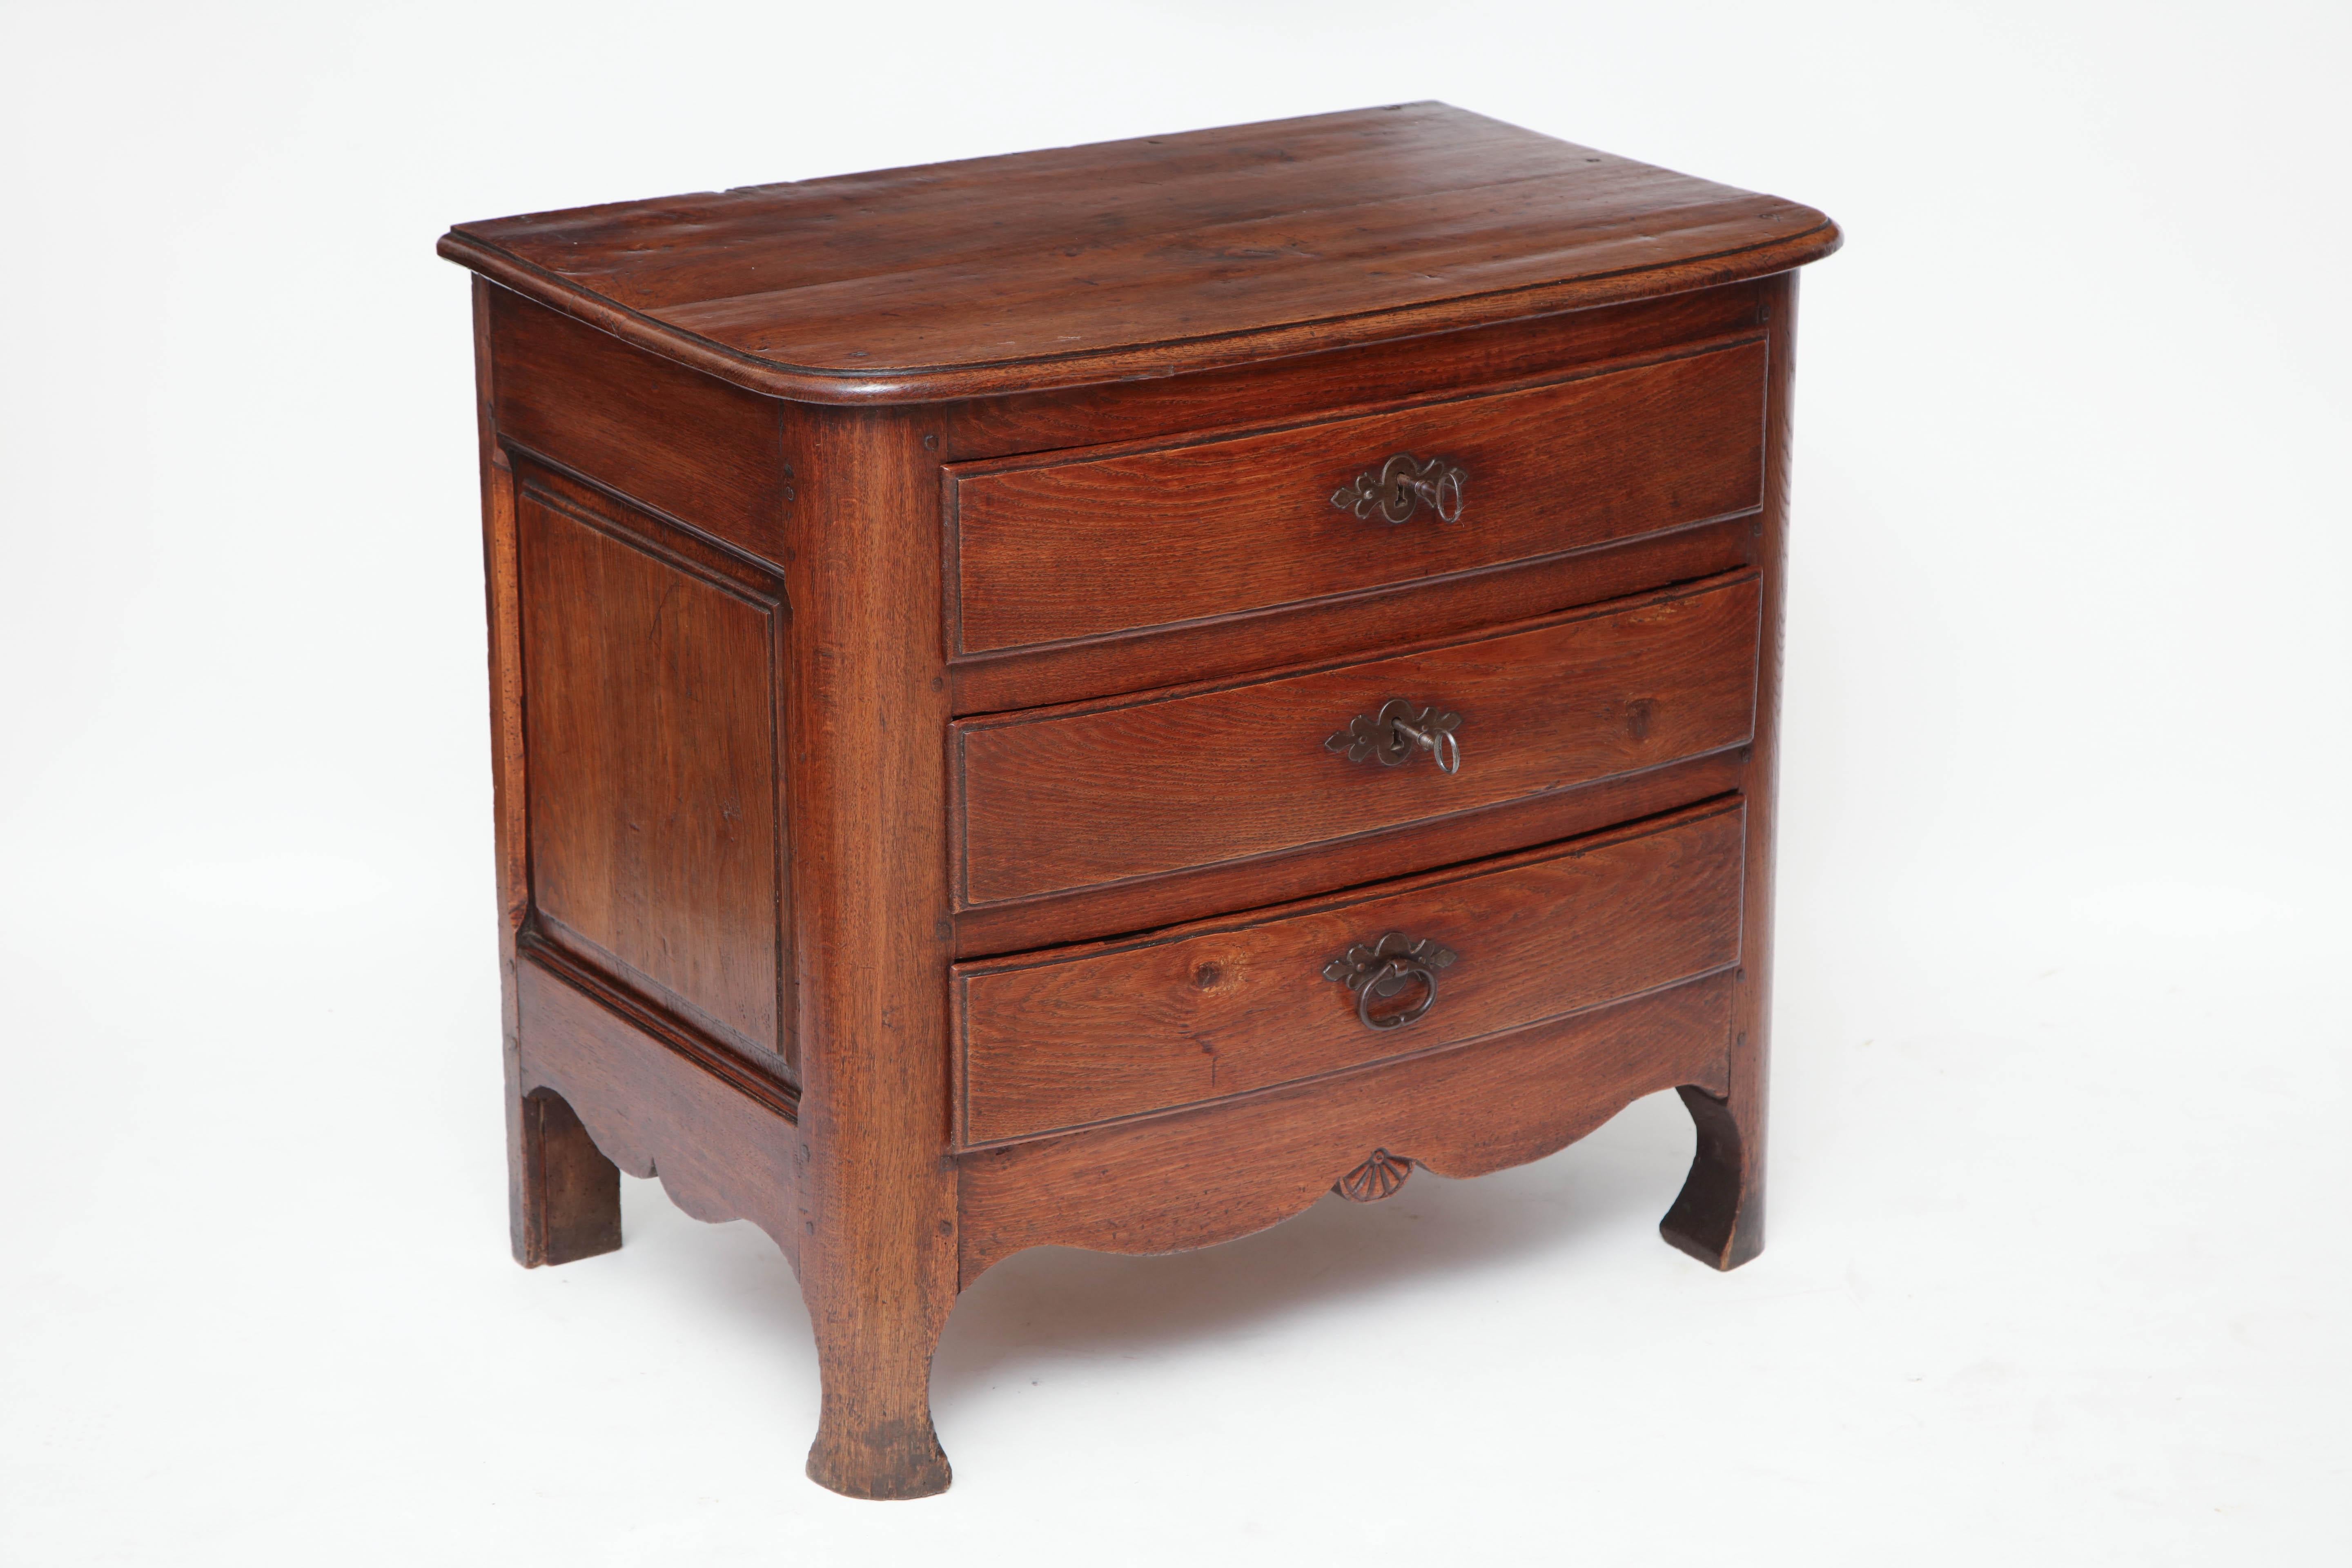 Oak three-drawer commode with rounded front supports, panelled sides, and original steel hardware, France, 18th century.

Overall dimensions: 31.5